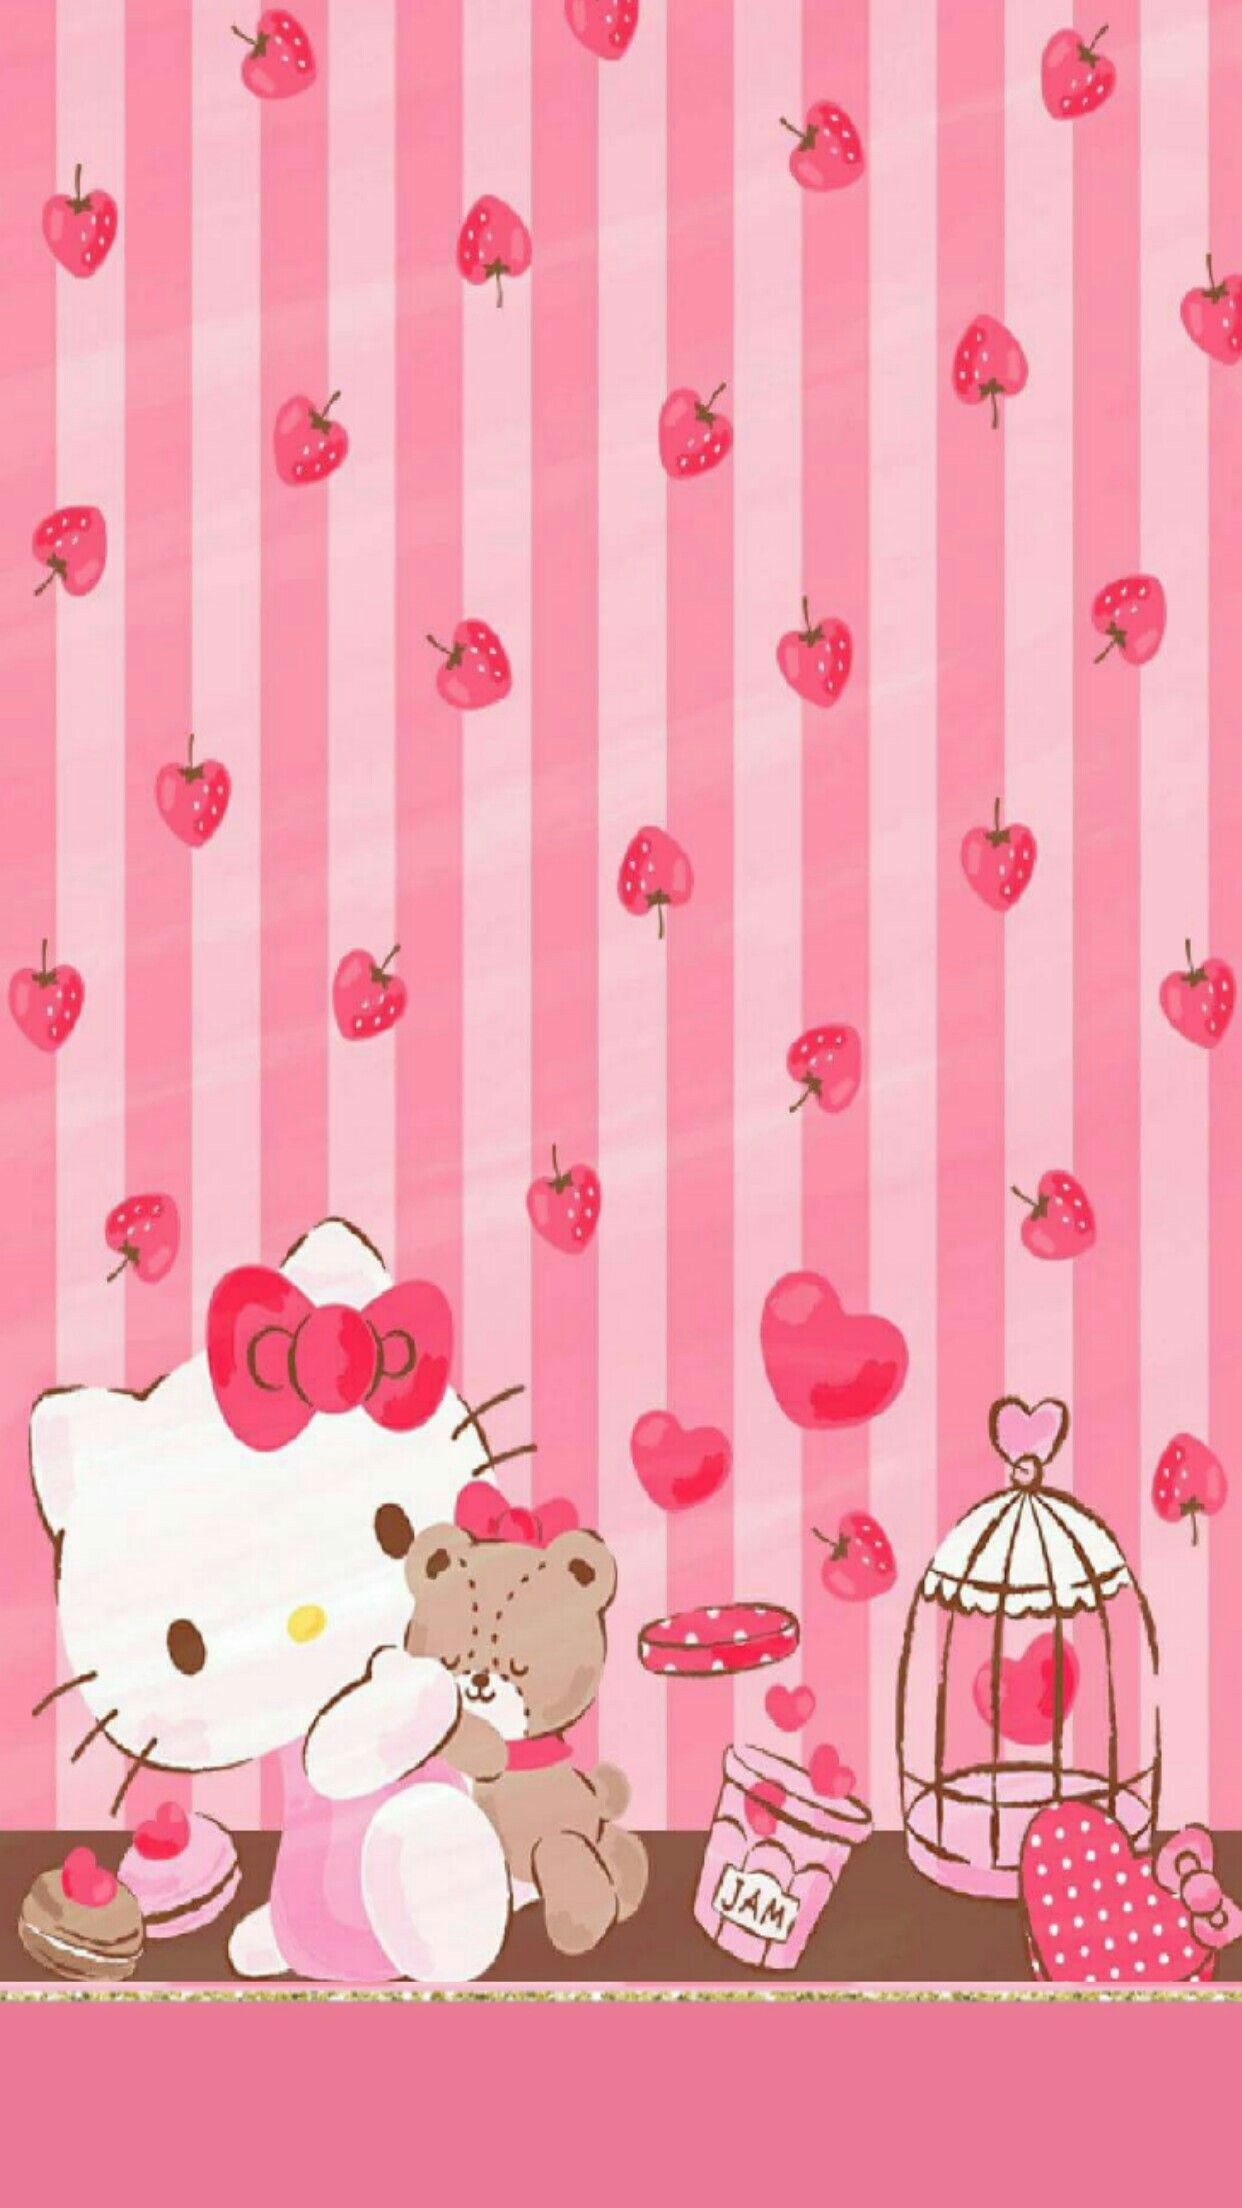 Iphone wall valentines day tjn hello kitty iphone wallpaper hello kitty wallpaper hello kitty pictures